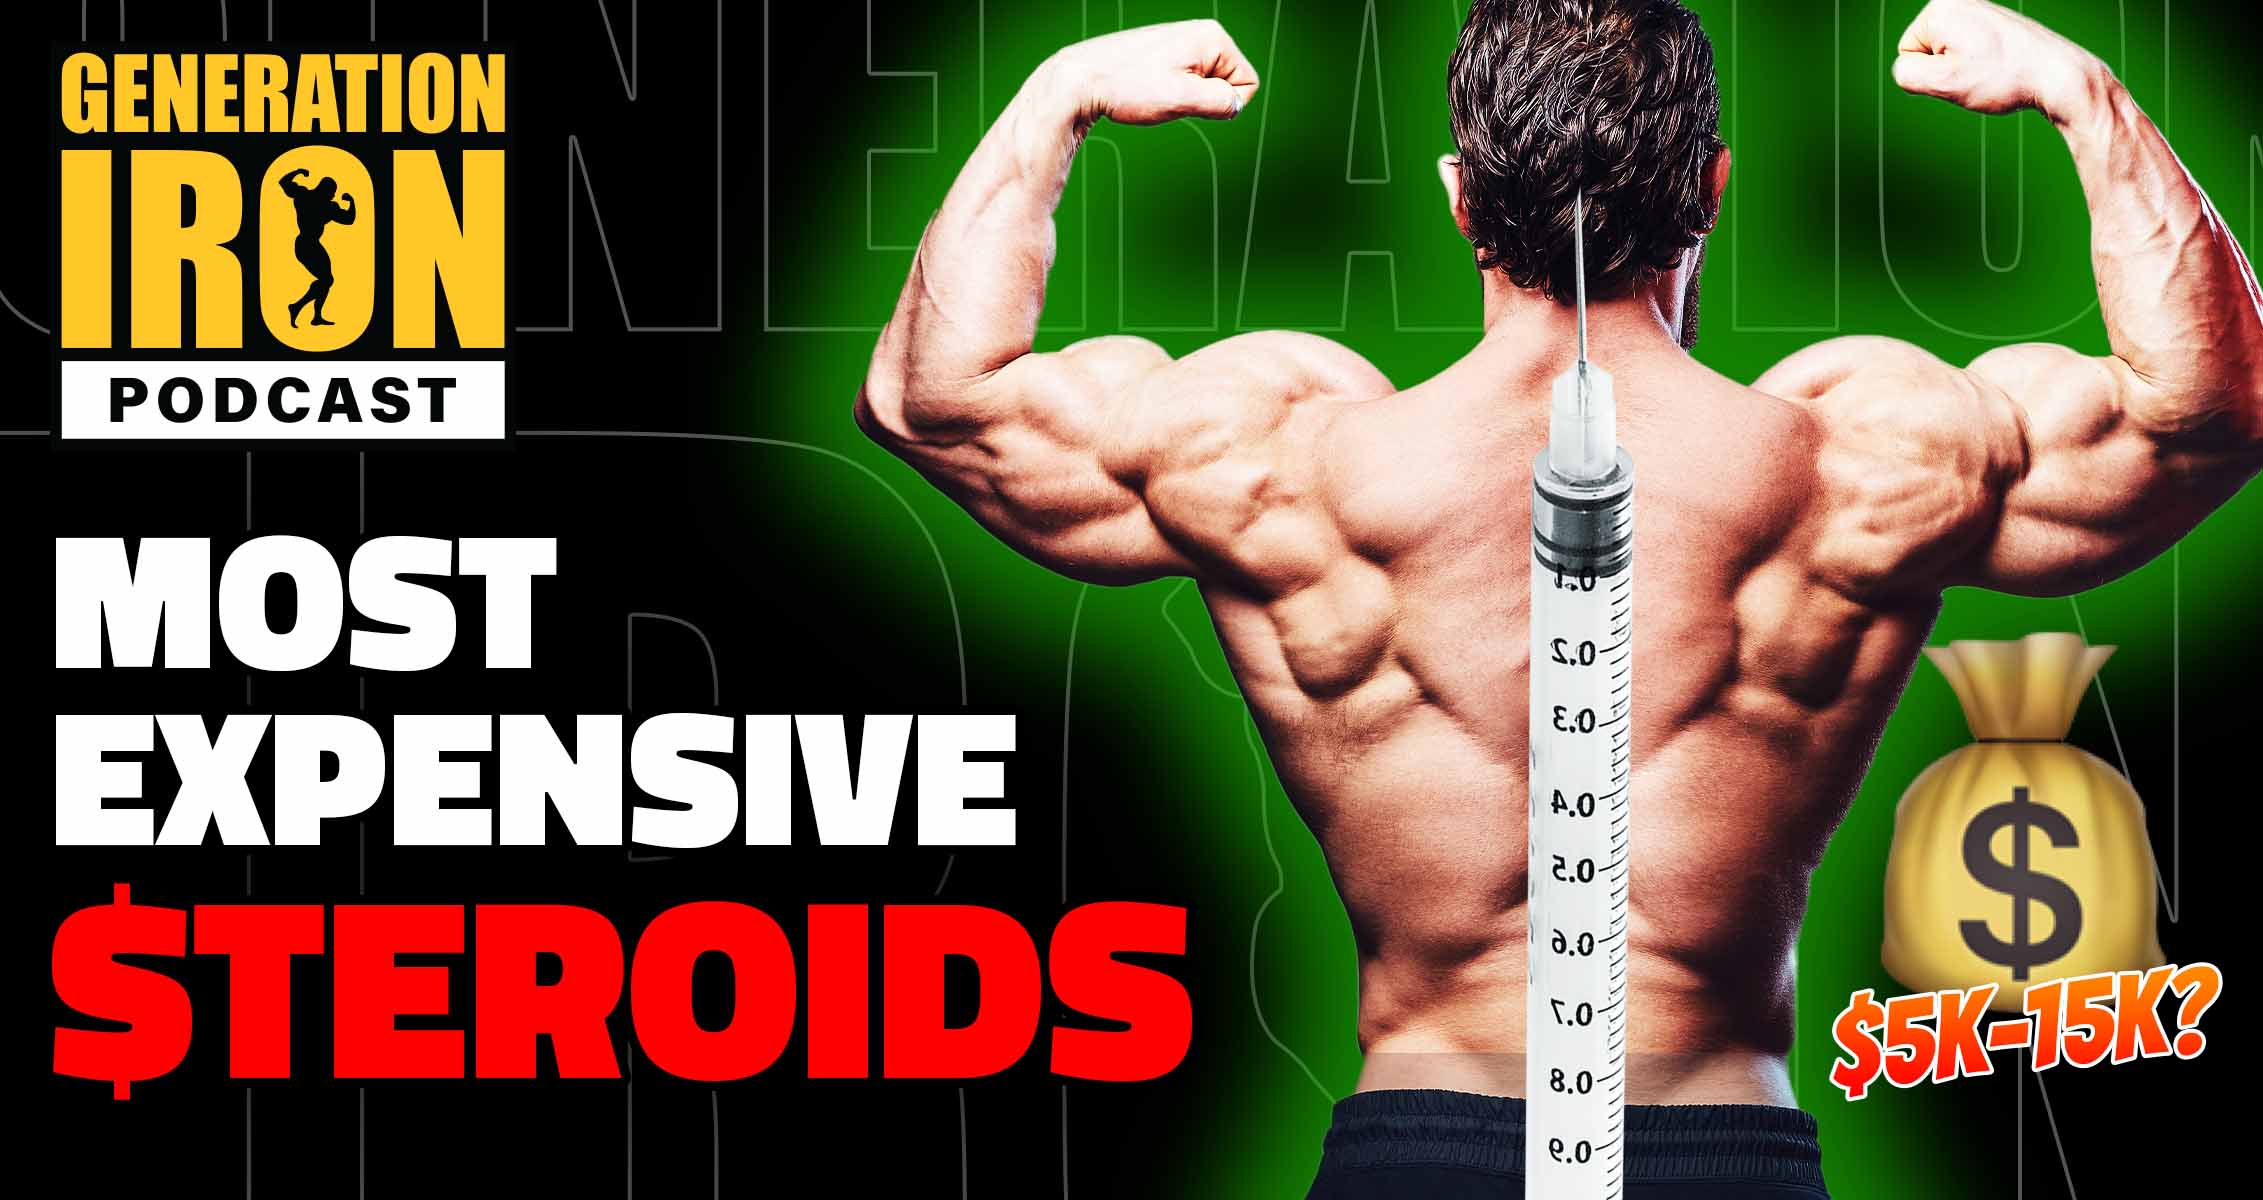 Victor Martinez shares the most expensive and cheapest steroids on the market for bodybuilding